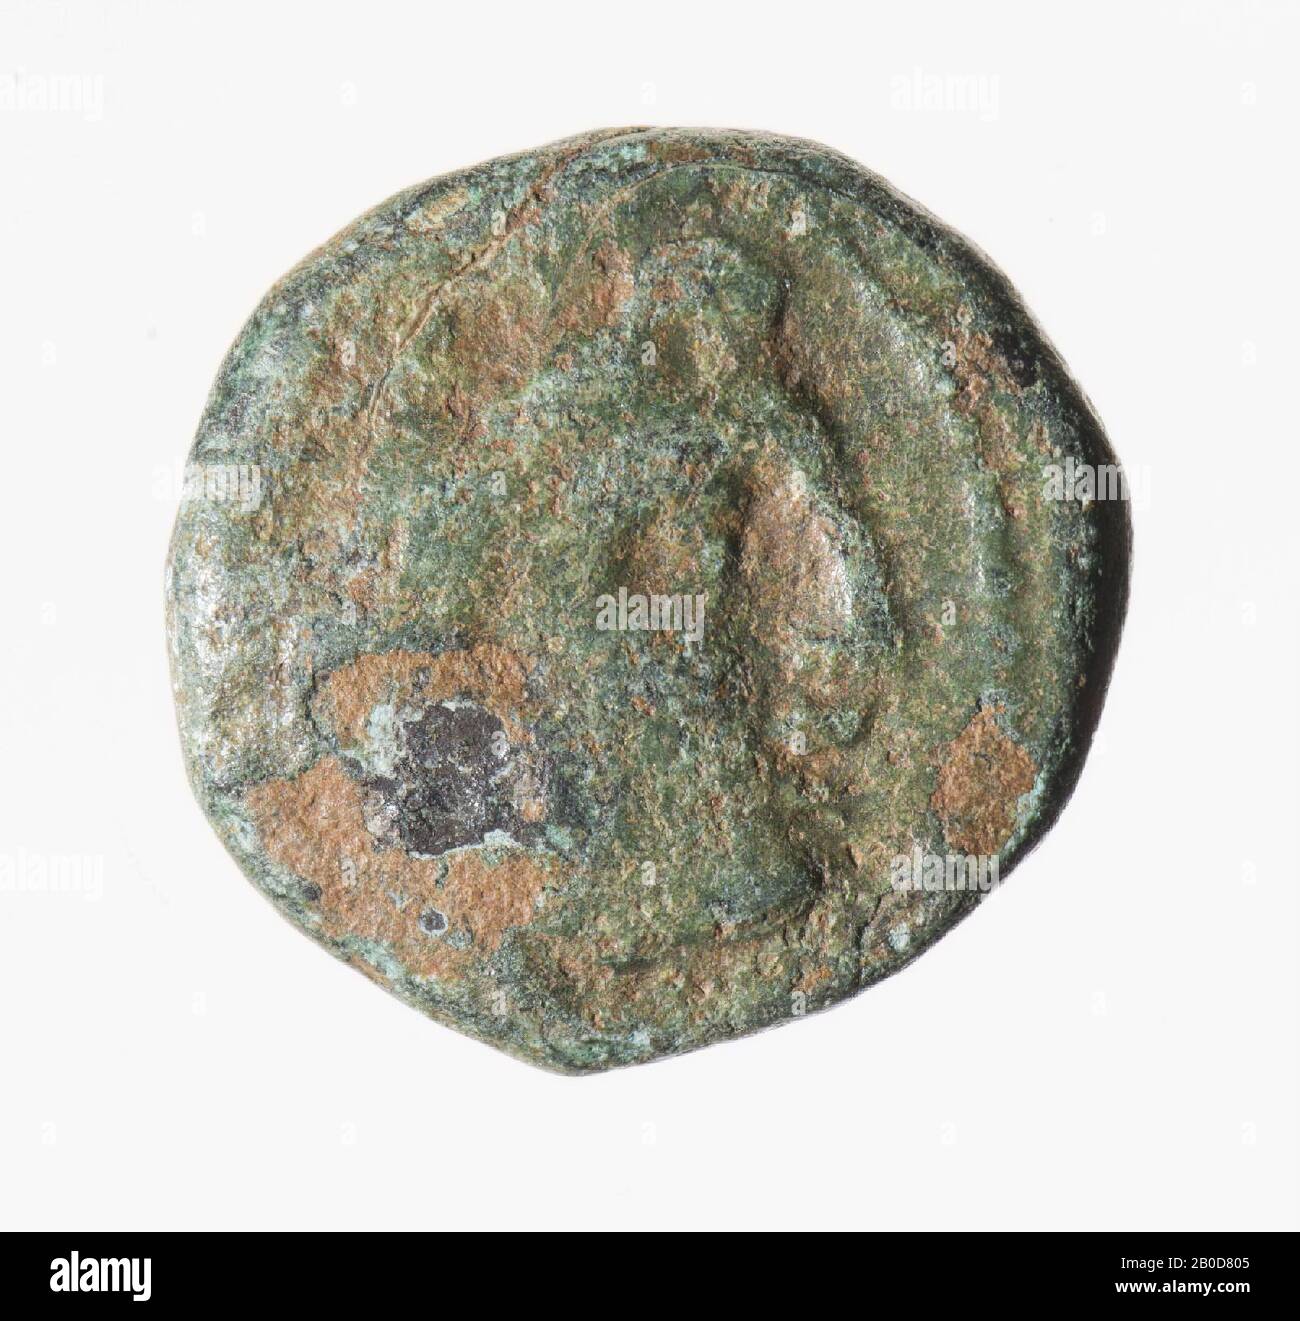 Obverse: Alexander as Heracles, with lion skin, right. Worn out. Reverse: Inscription between club and bow with quiver. ALEXANDROU, coin, by Alexander the Great, metal, bronze, diam: 1,5 cm, wt. 2.73 grams, 336-323 BC, unknown Stock Photo